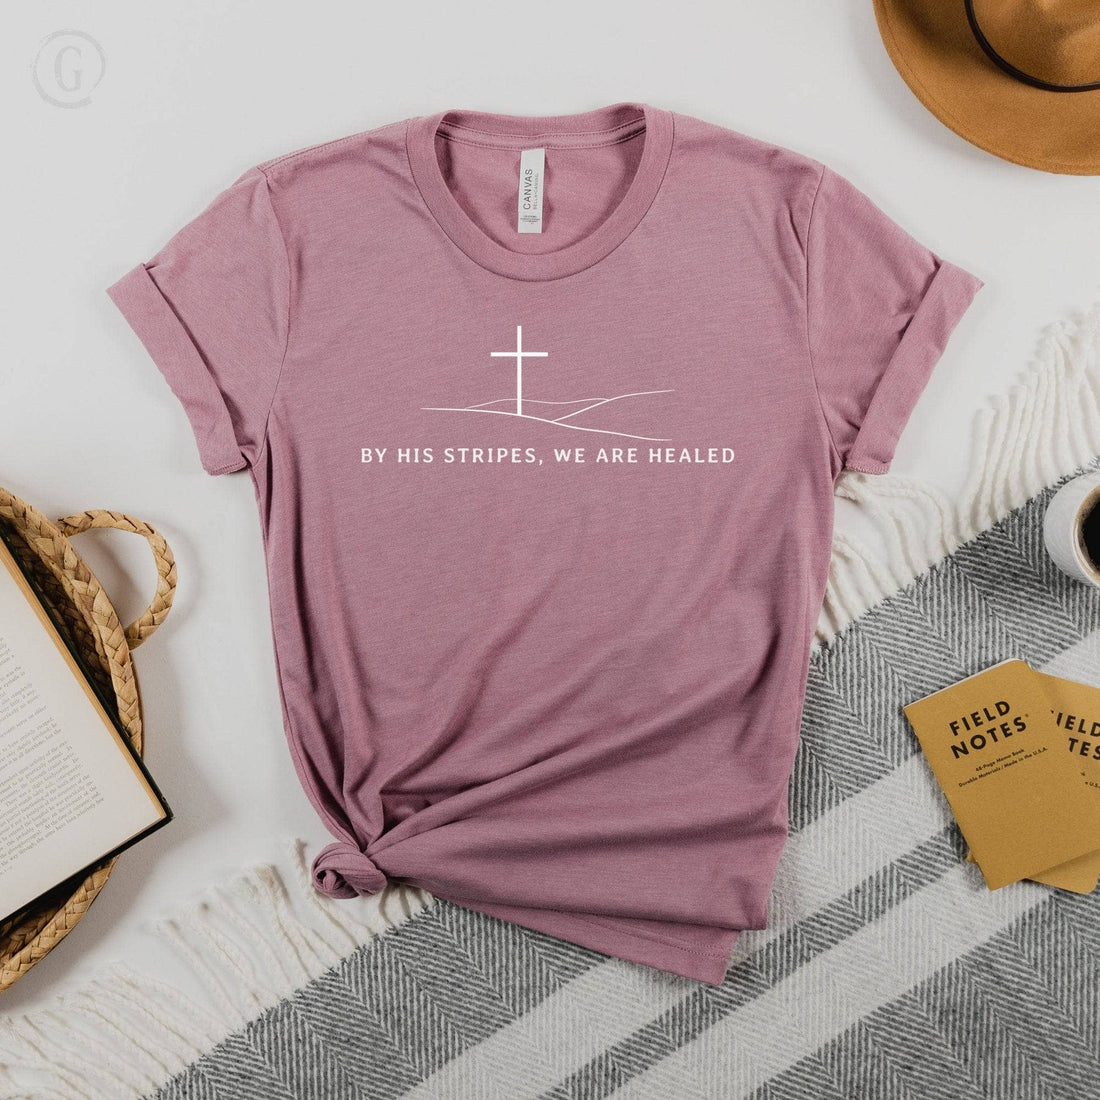 By His Stripes, We Are Healed Isaiah 53:5 Unisex T-Shirt Heathers Heather Orchid